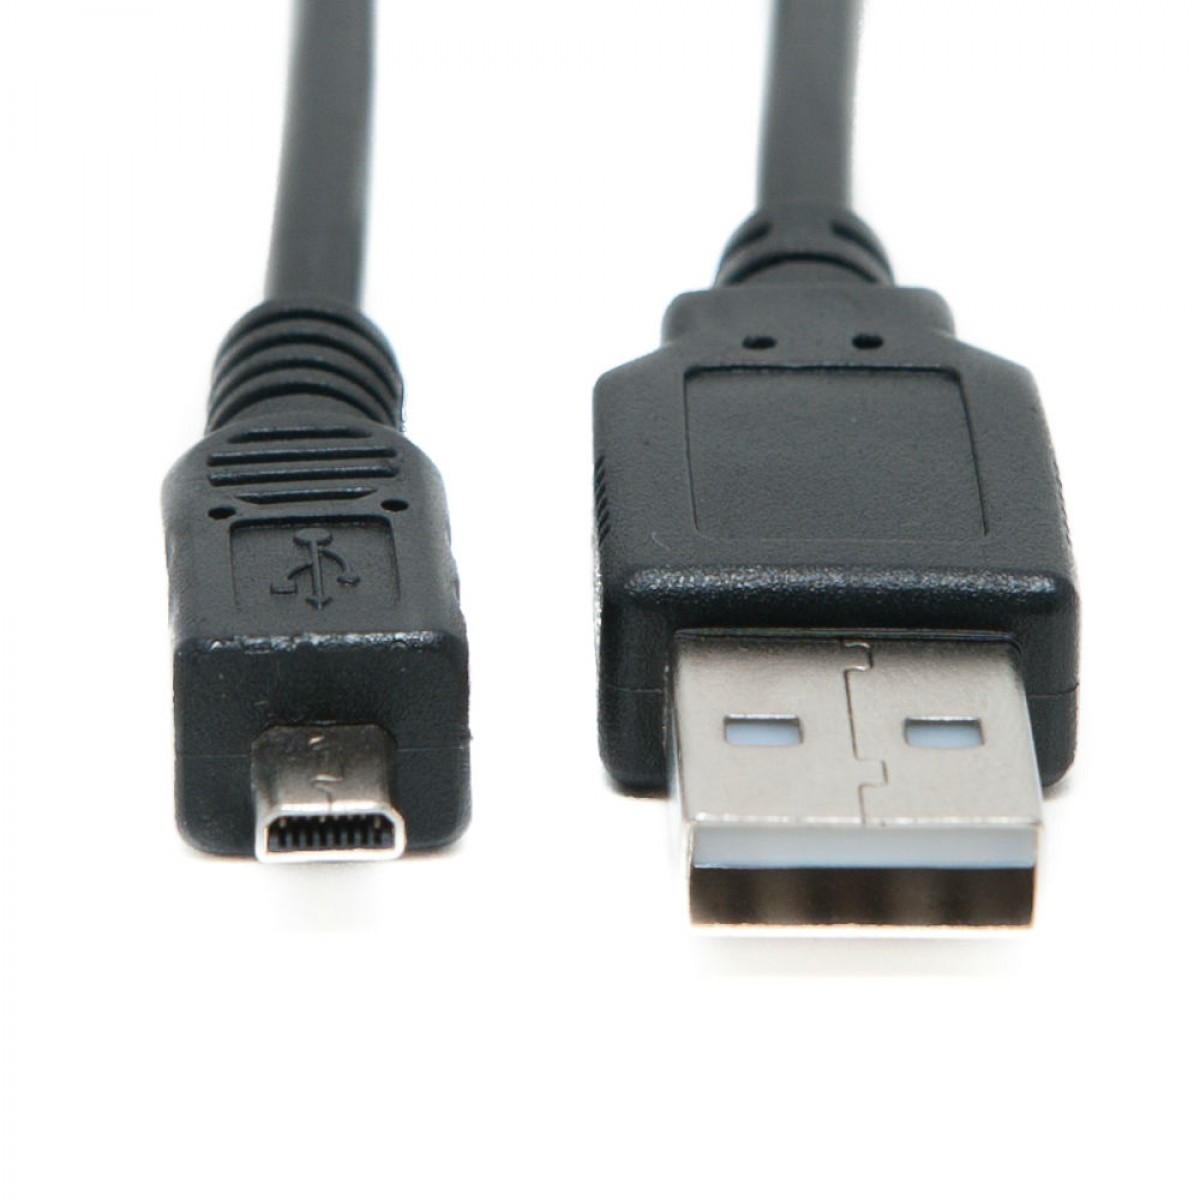 Nikon COOLPIX P520 Camera USB Cable - A Perfect Replacement for the